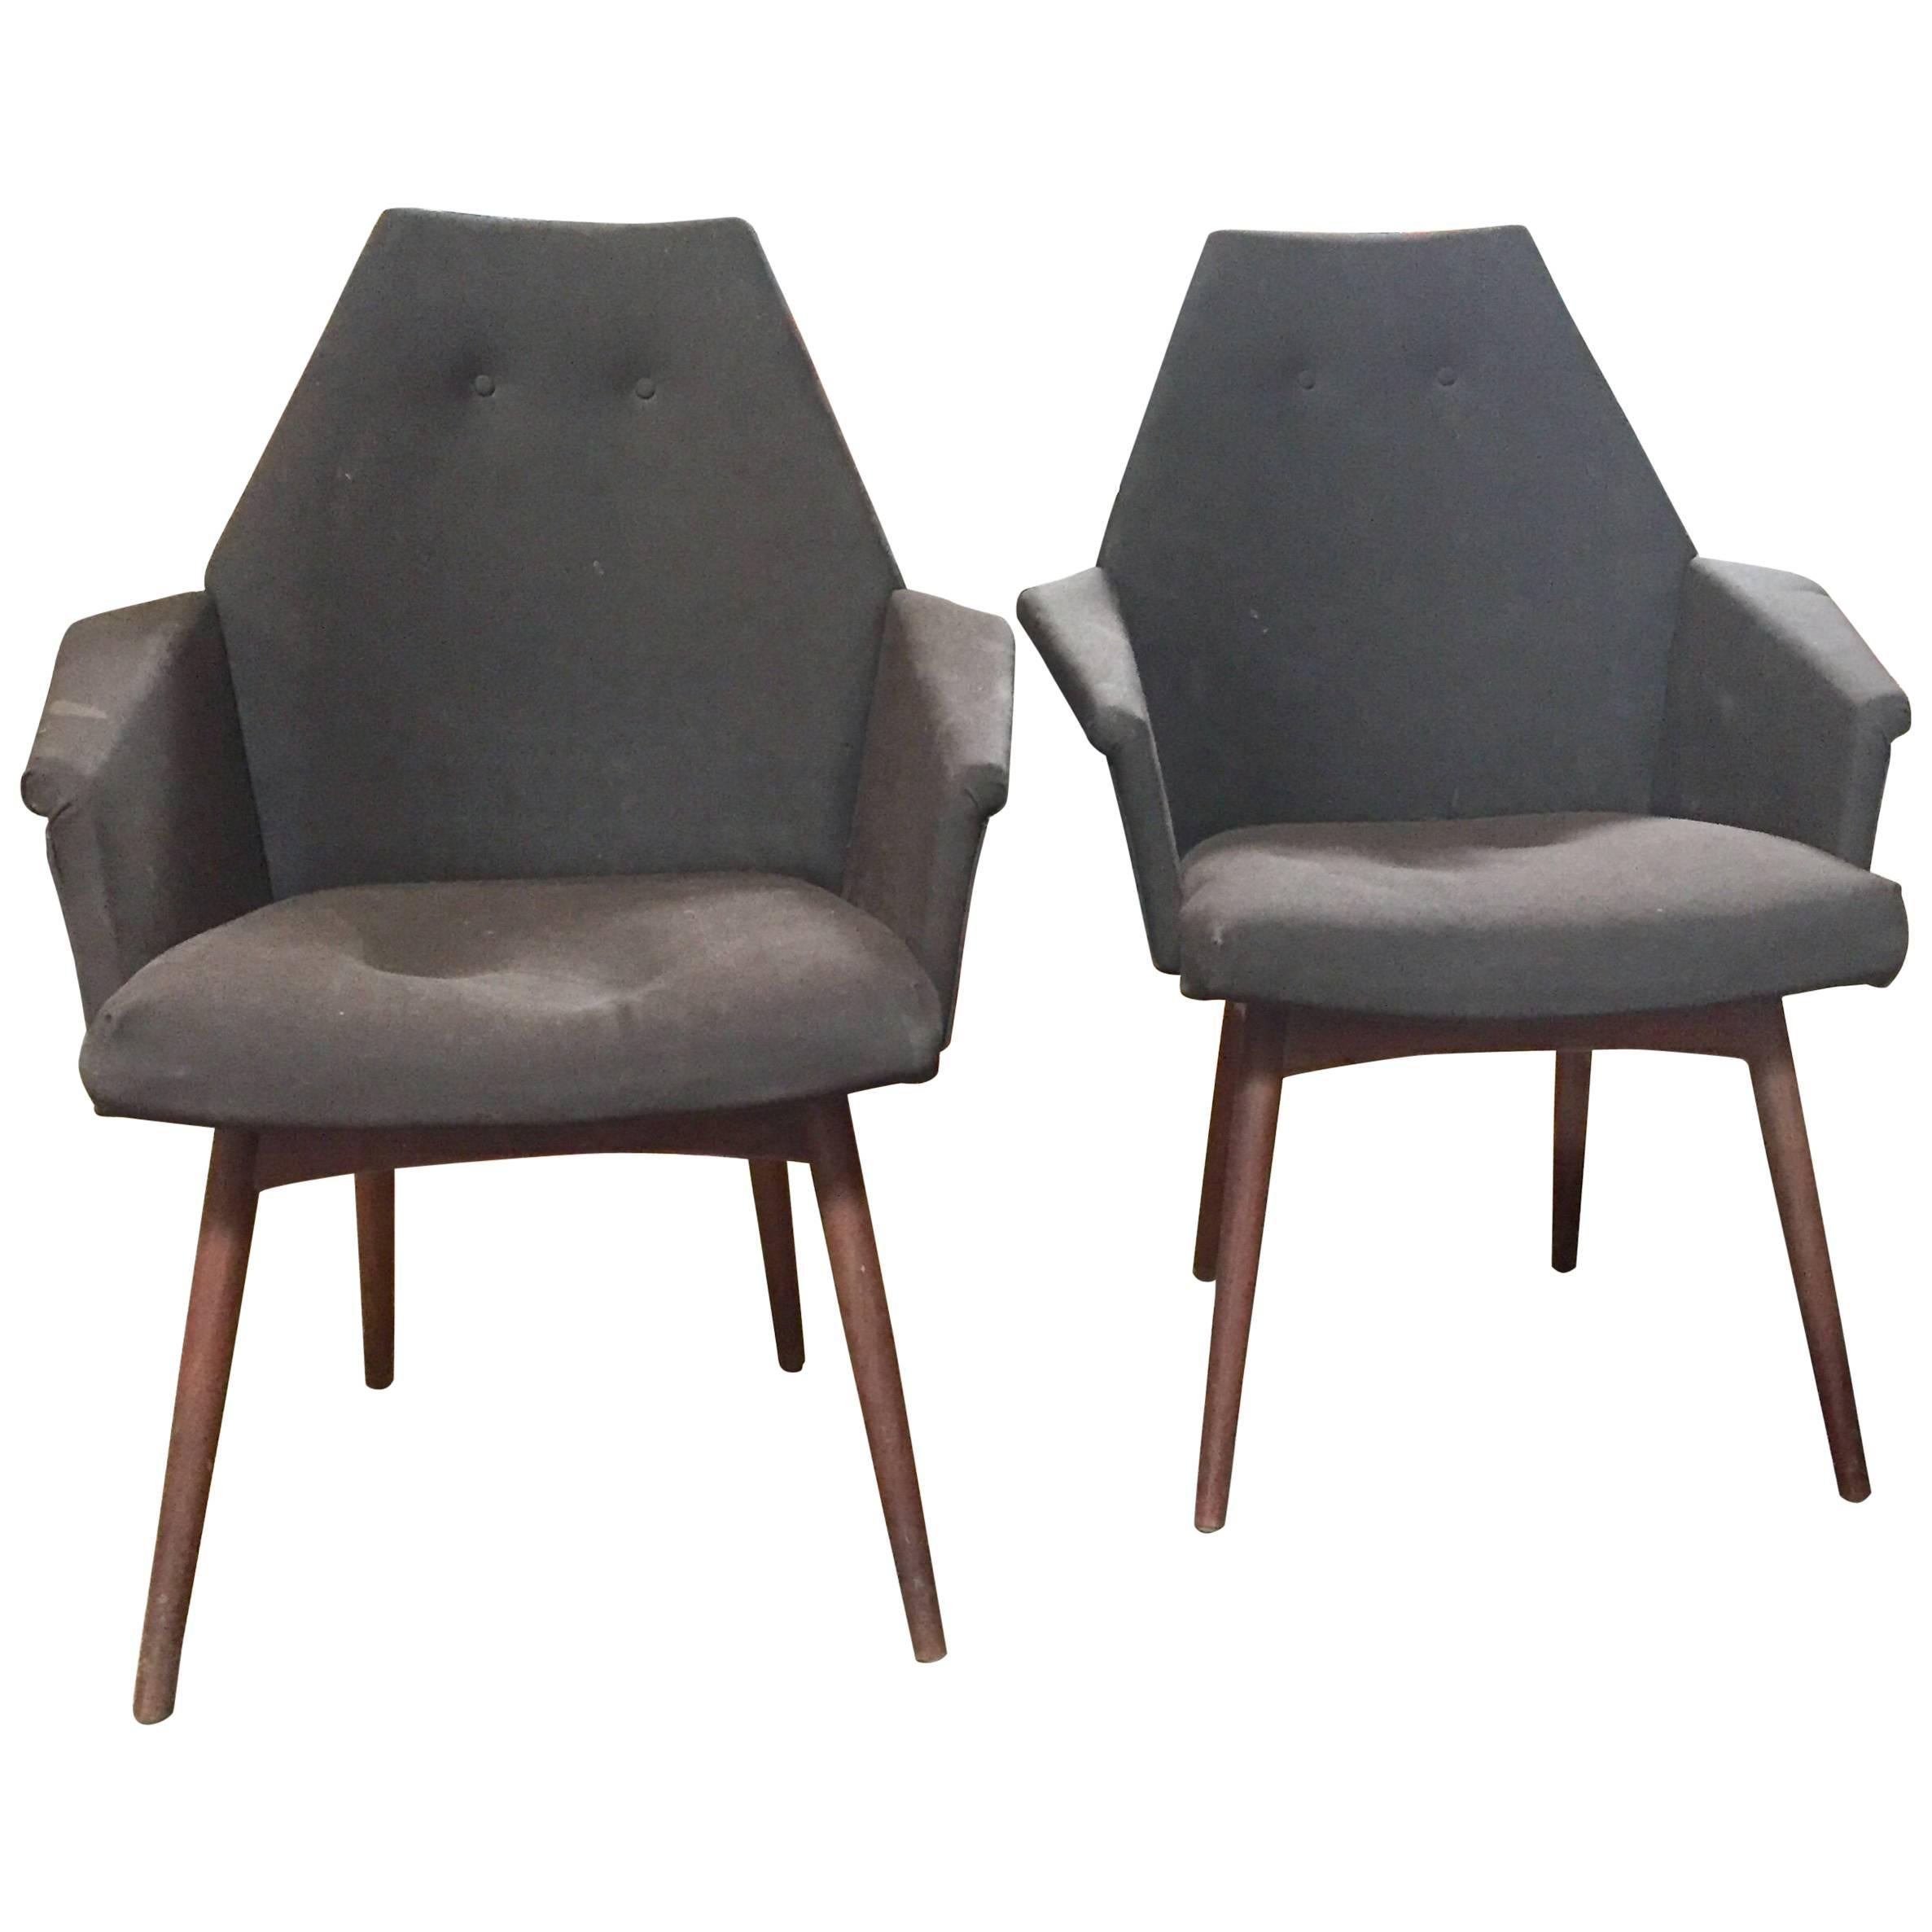 Adrian Pearsall Pair of Chairs For Sale